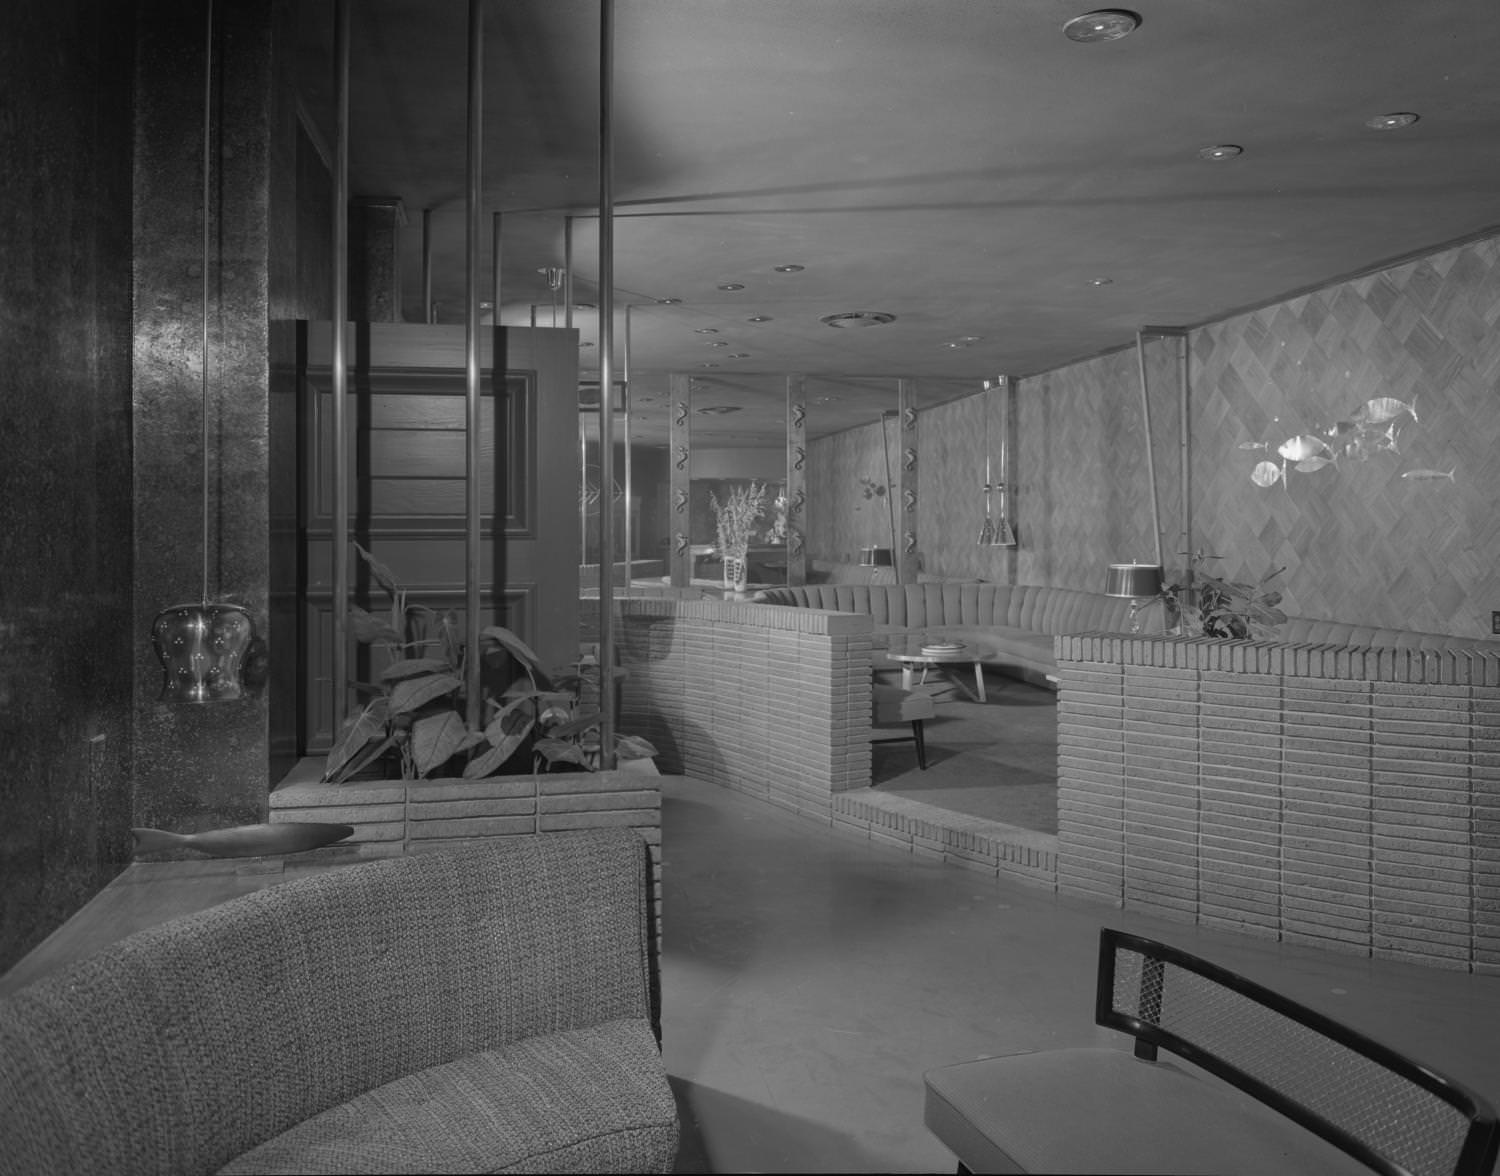 The Austin Club lounge with a seating area enclosed in a low brick wall, 1955